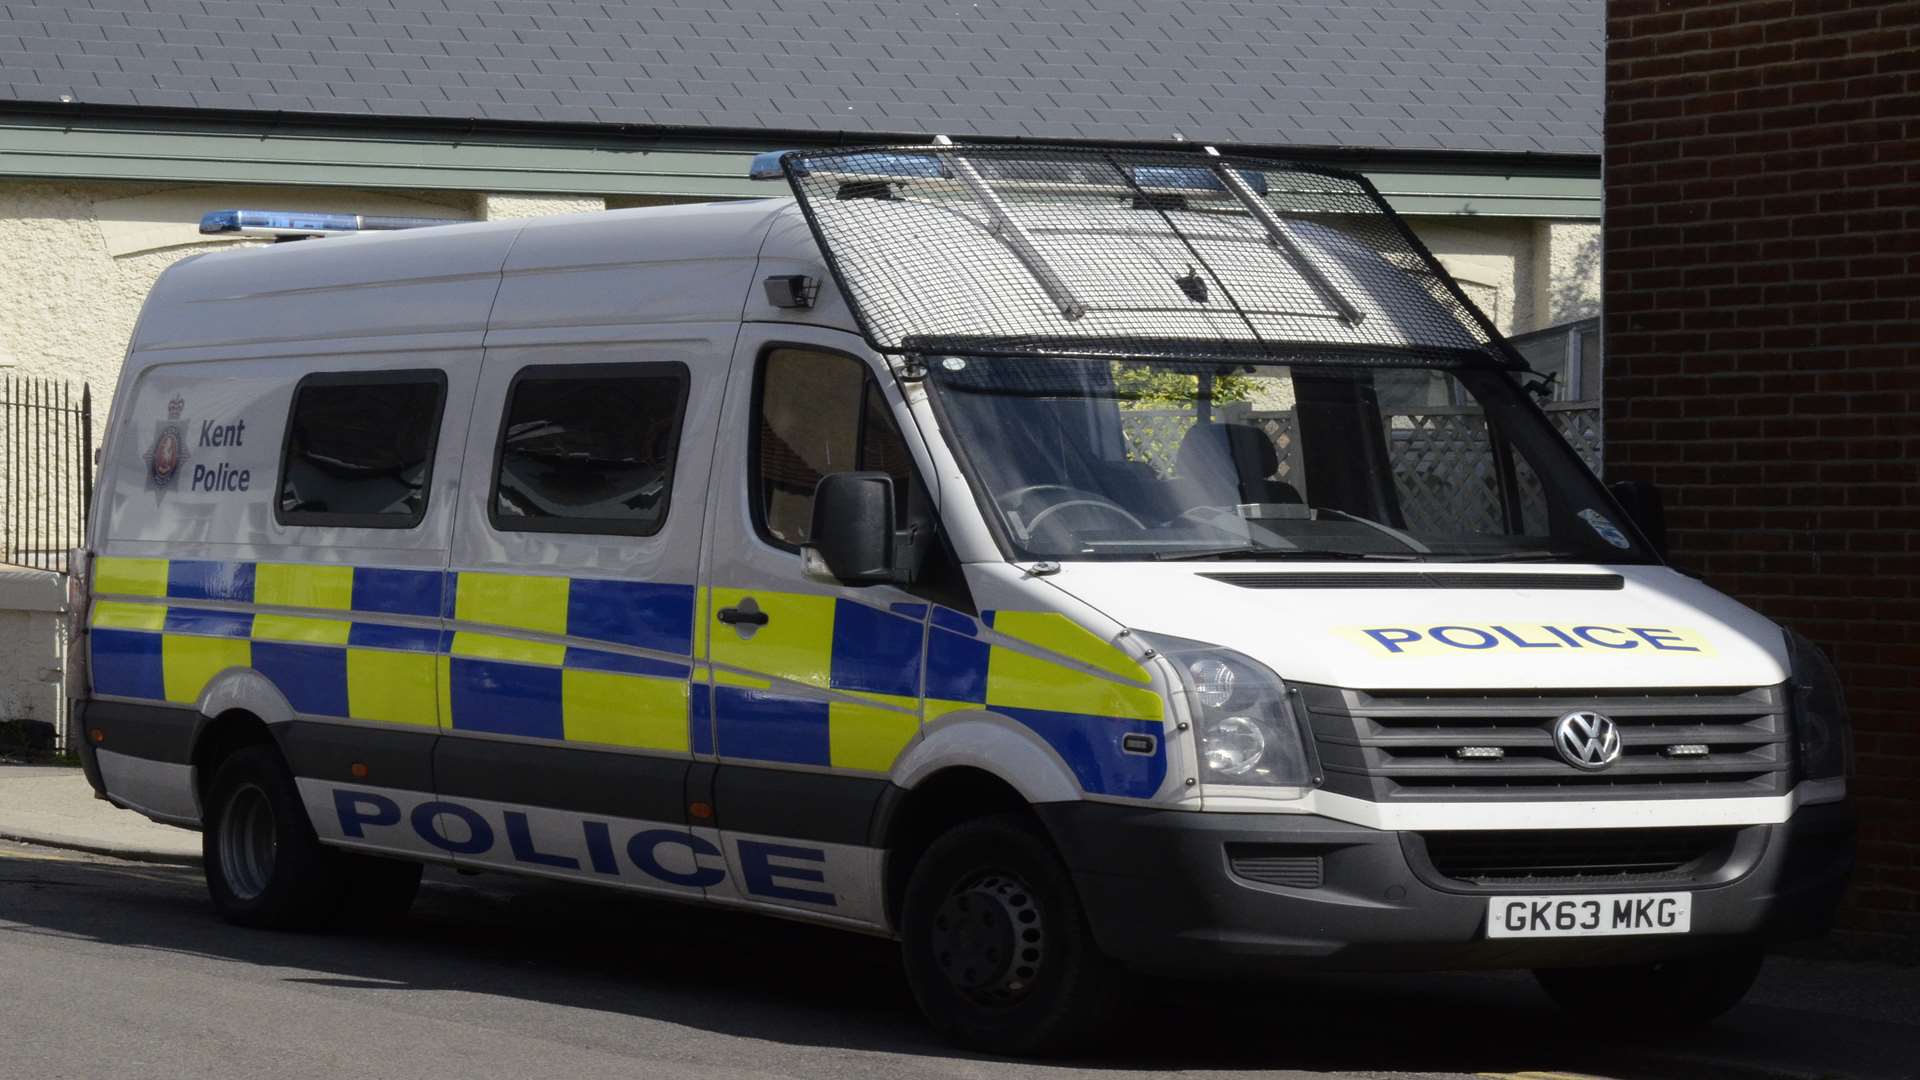 A police van was used during the raid